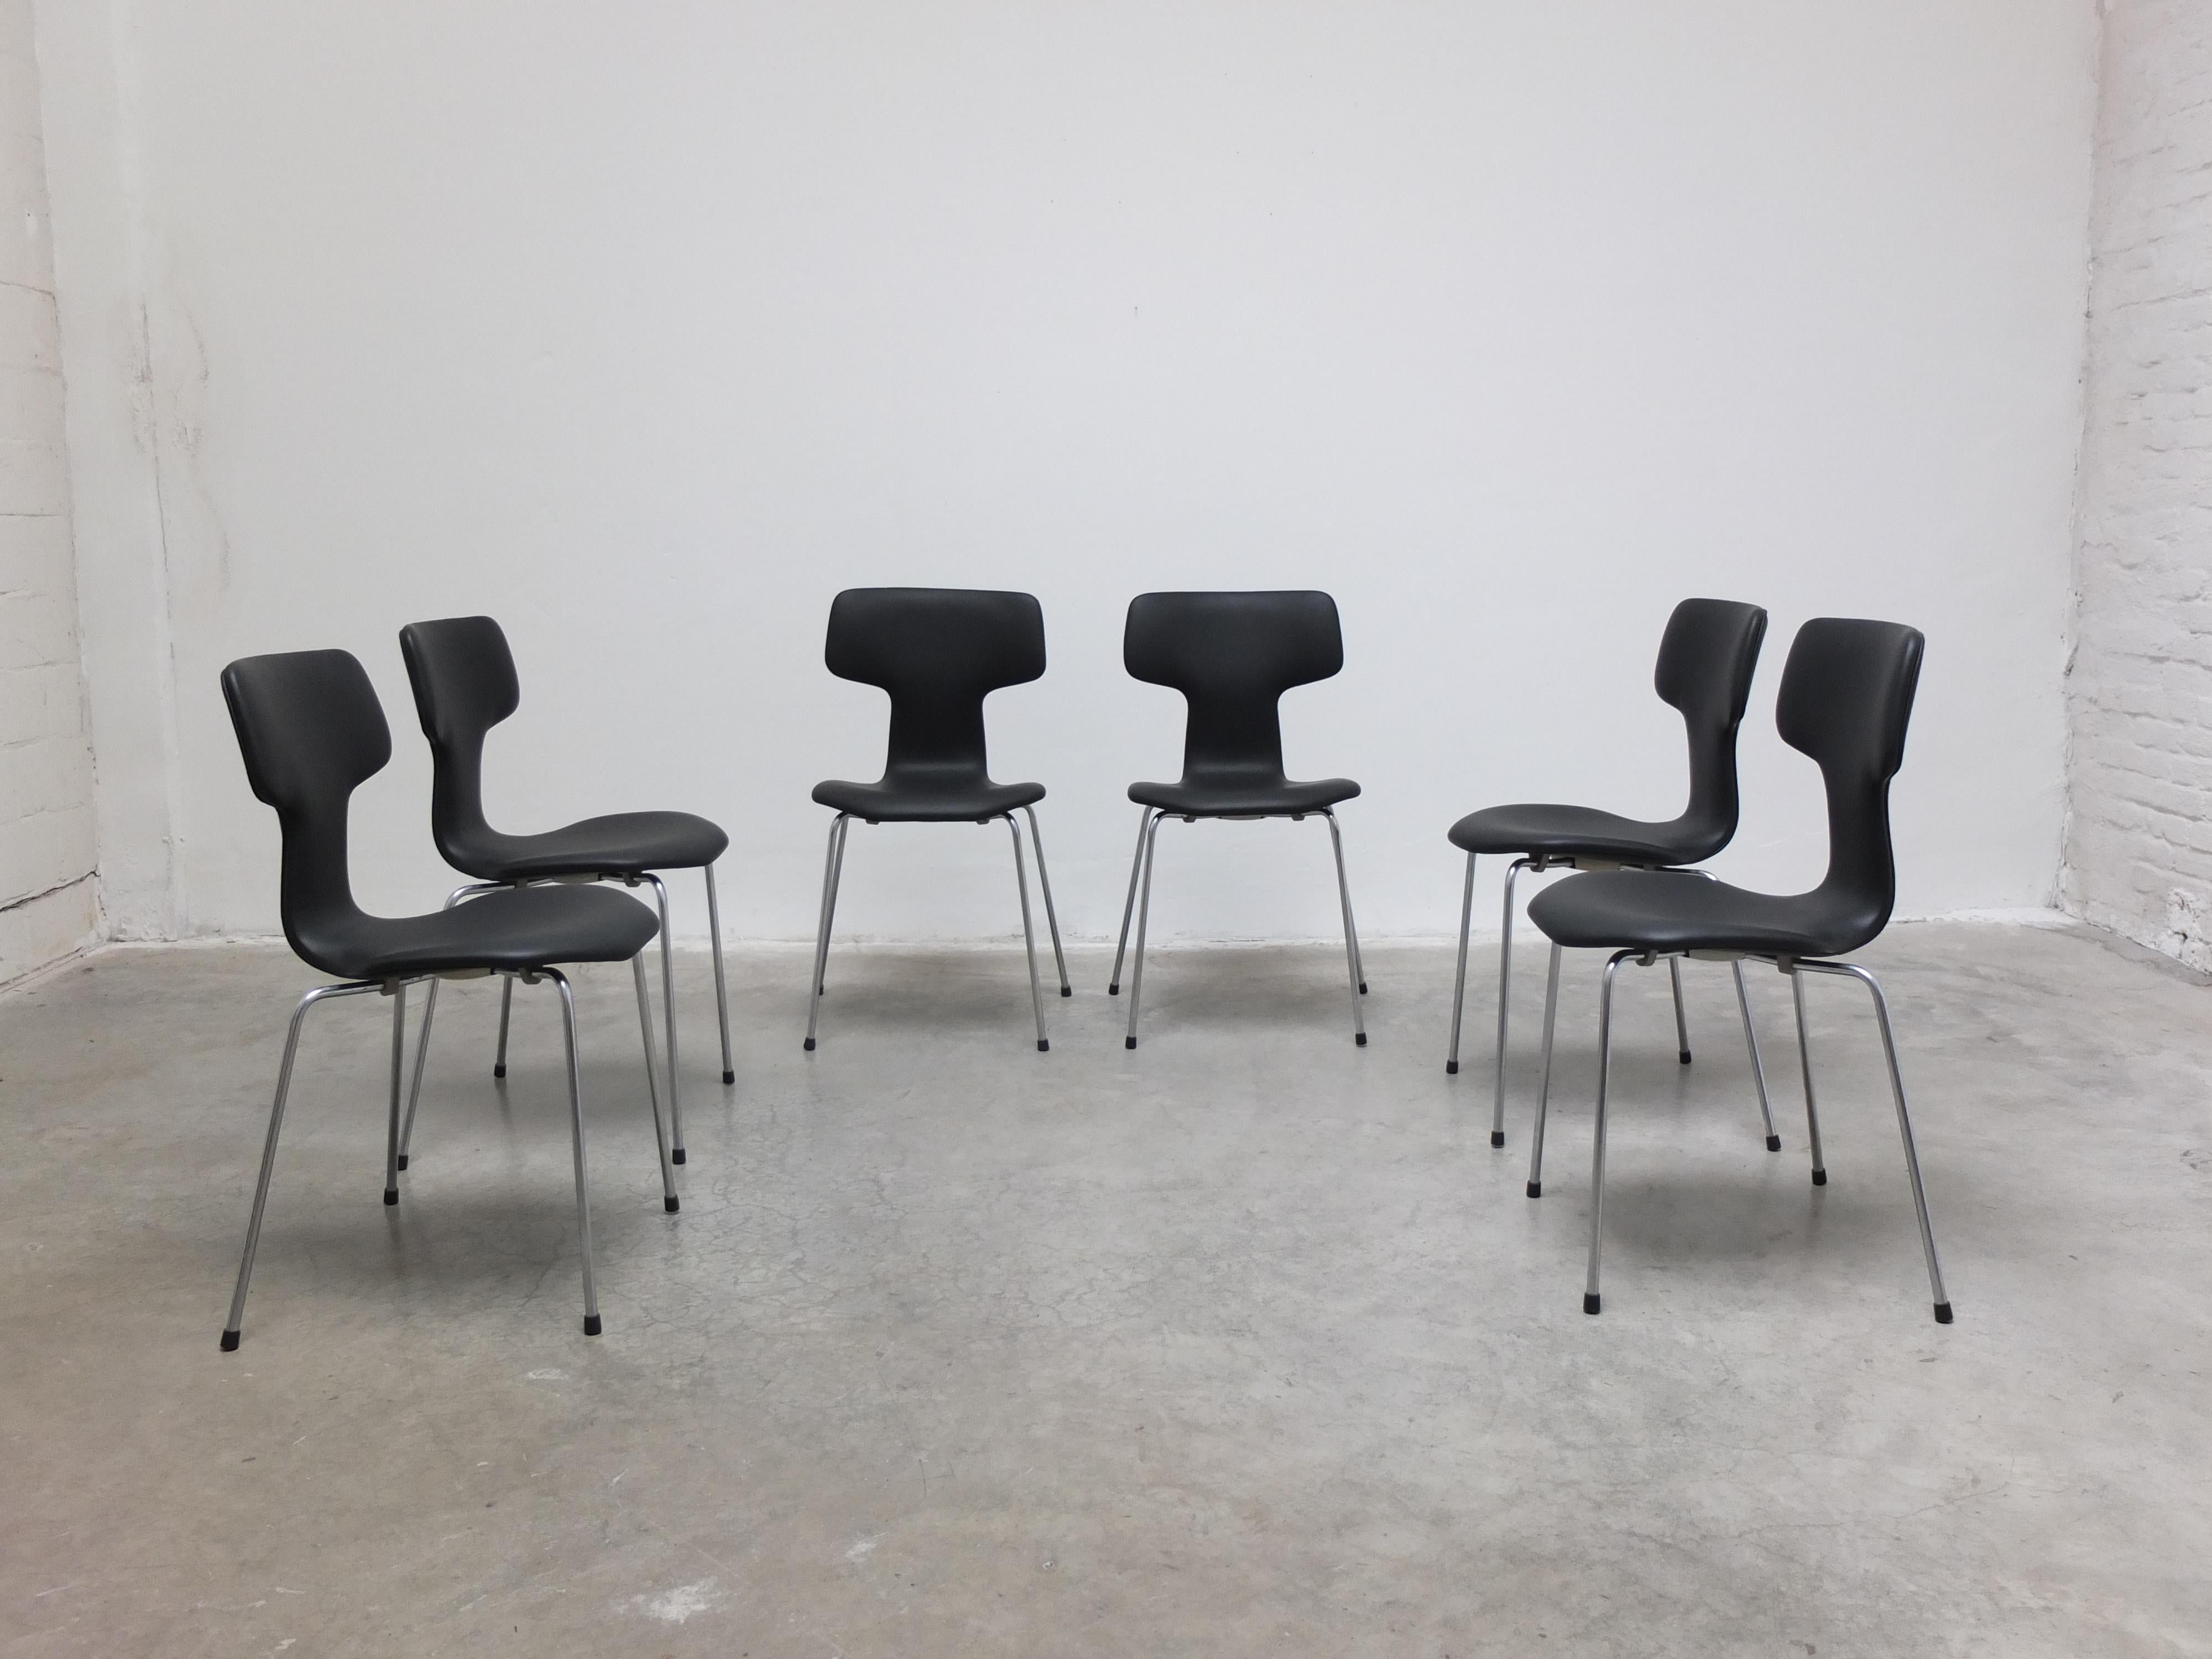 20th Century Set of 6 'Hammer' Chairs in Leather by Arne Jacobsen for Fritz Hansen, 1967 For Sale